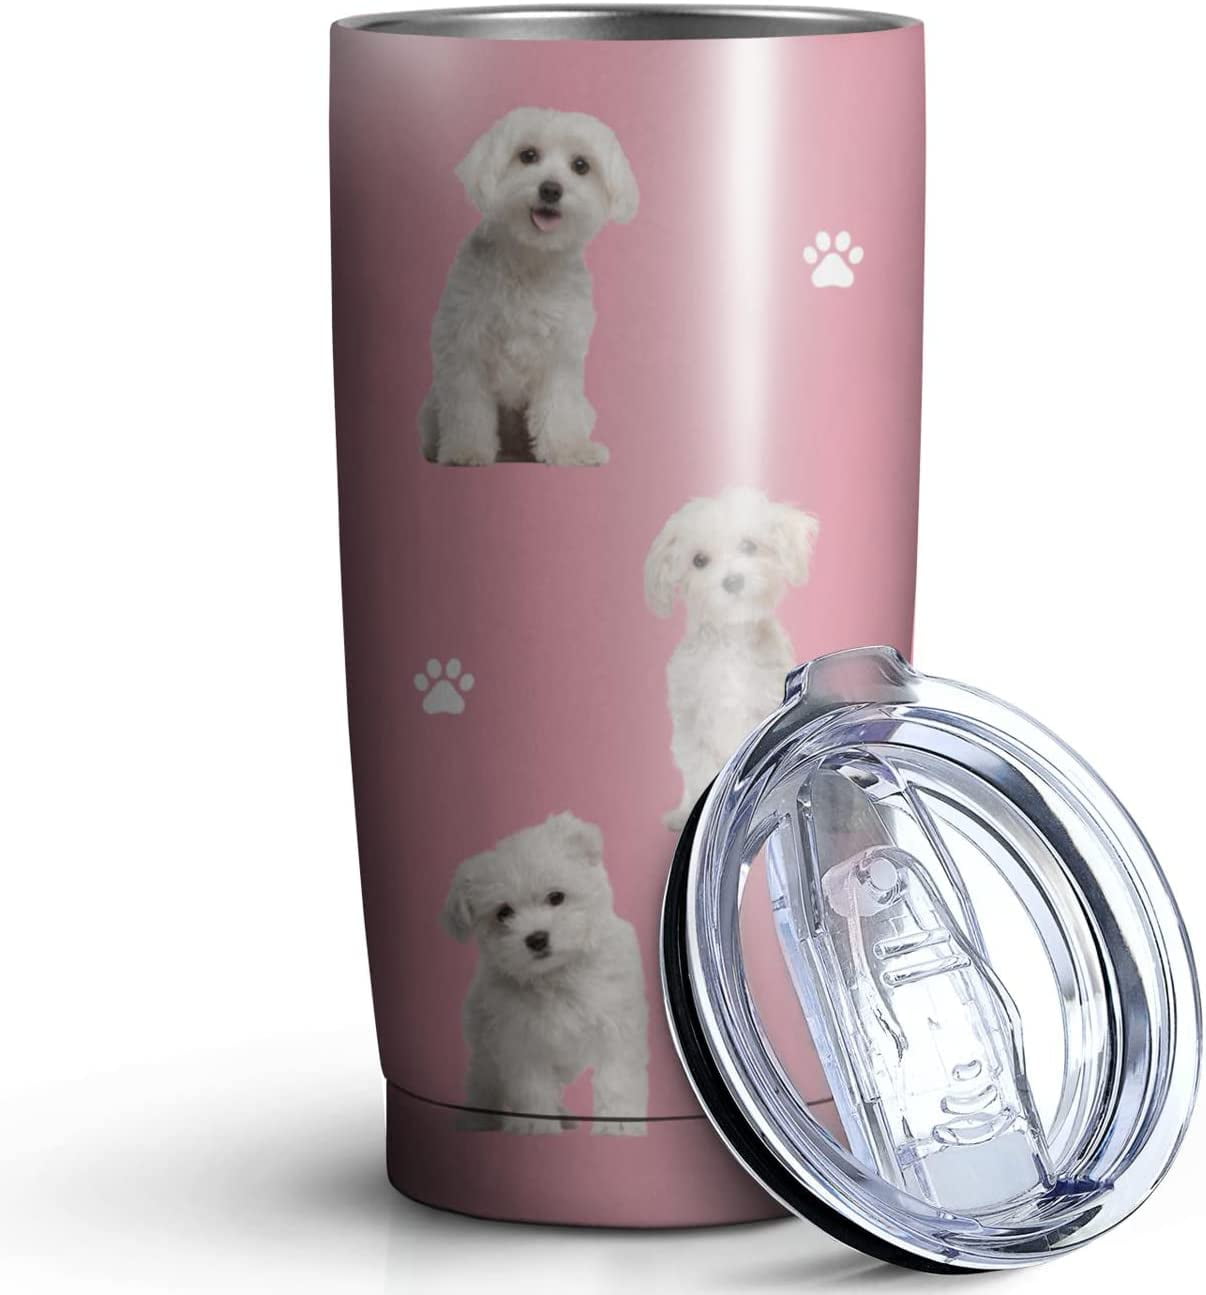 Boxer Design Tumbler Stainless Steel Insulated Travel Coffee Cups with Lid and Straw,Ideal Memorial Gift for Dog Dad/Mom,20oz